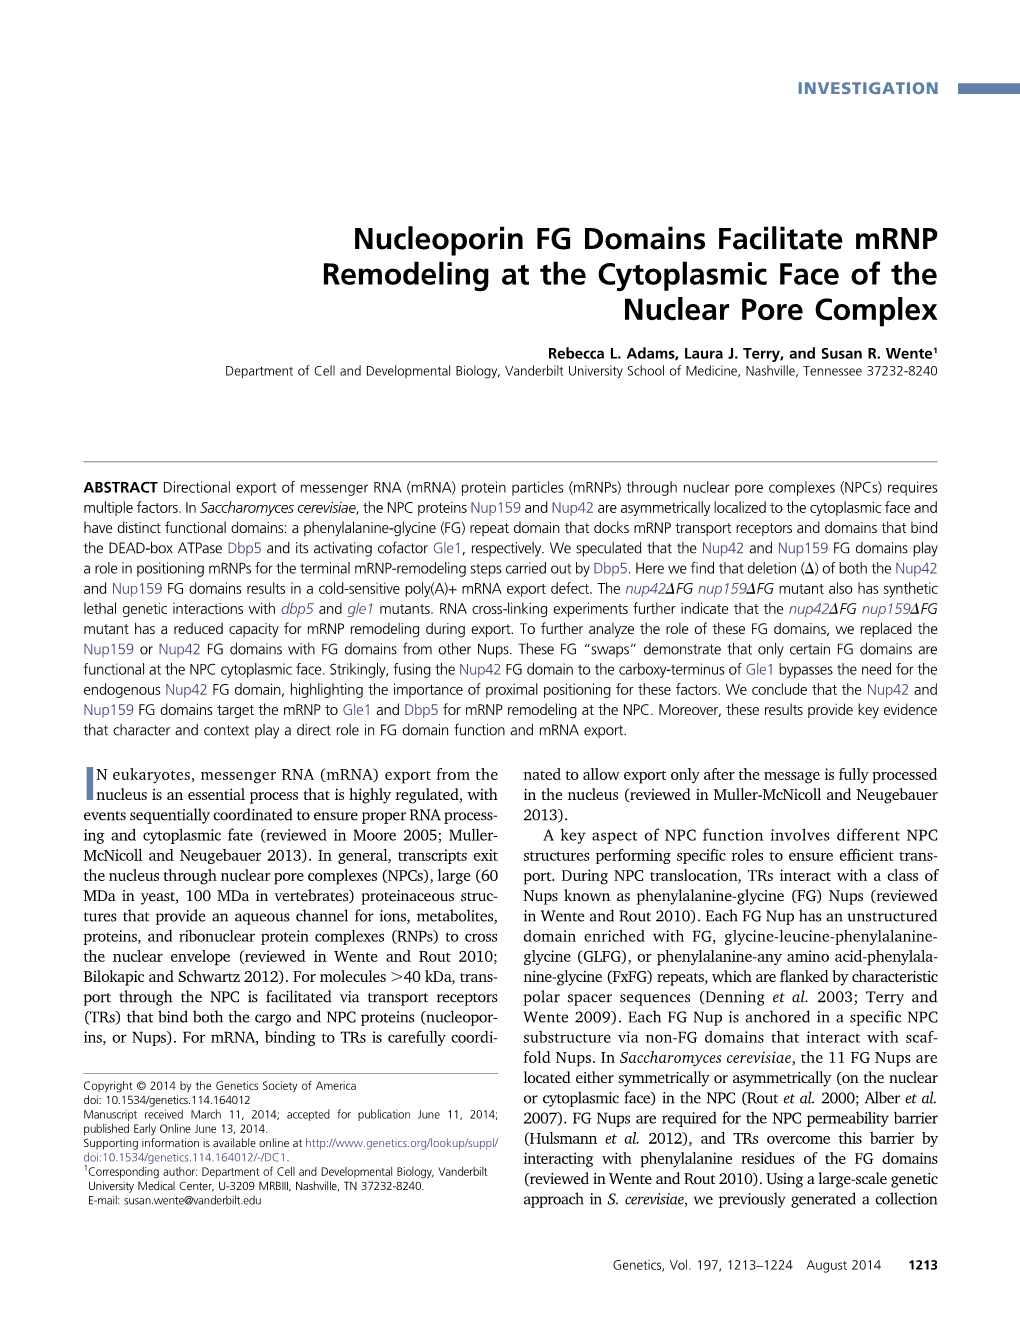 Nucleoporin FG Domains Facilitate Mrnp Remodeling at the Cytoplasmic Face of the Nuclear Pore Complex